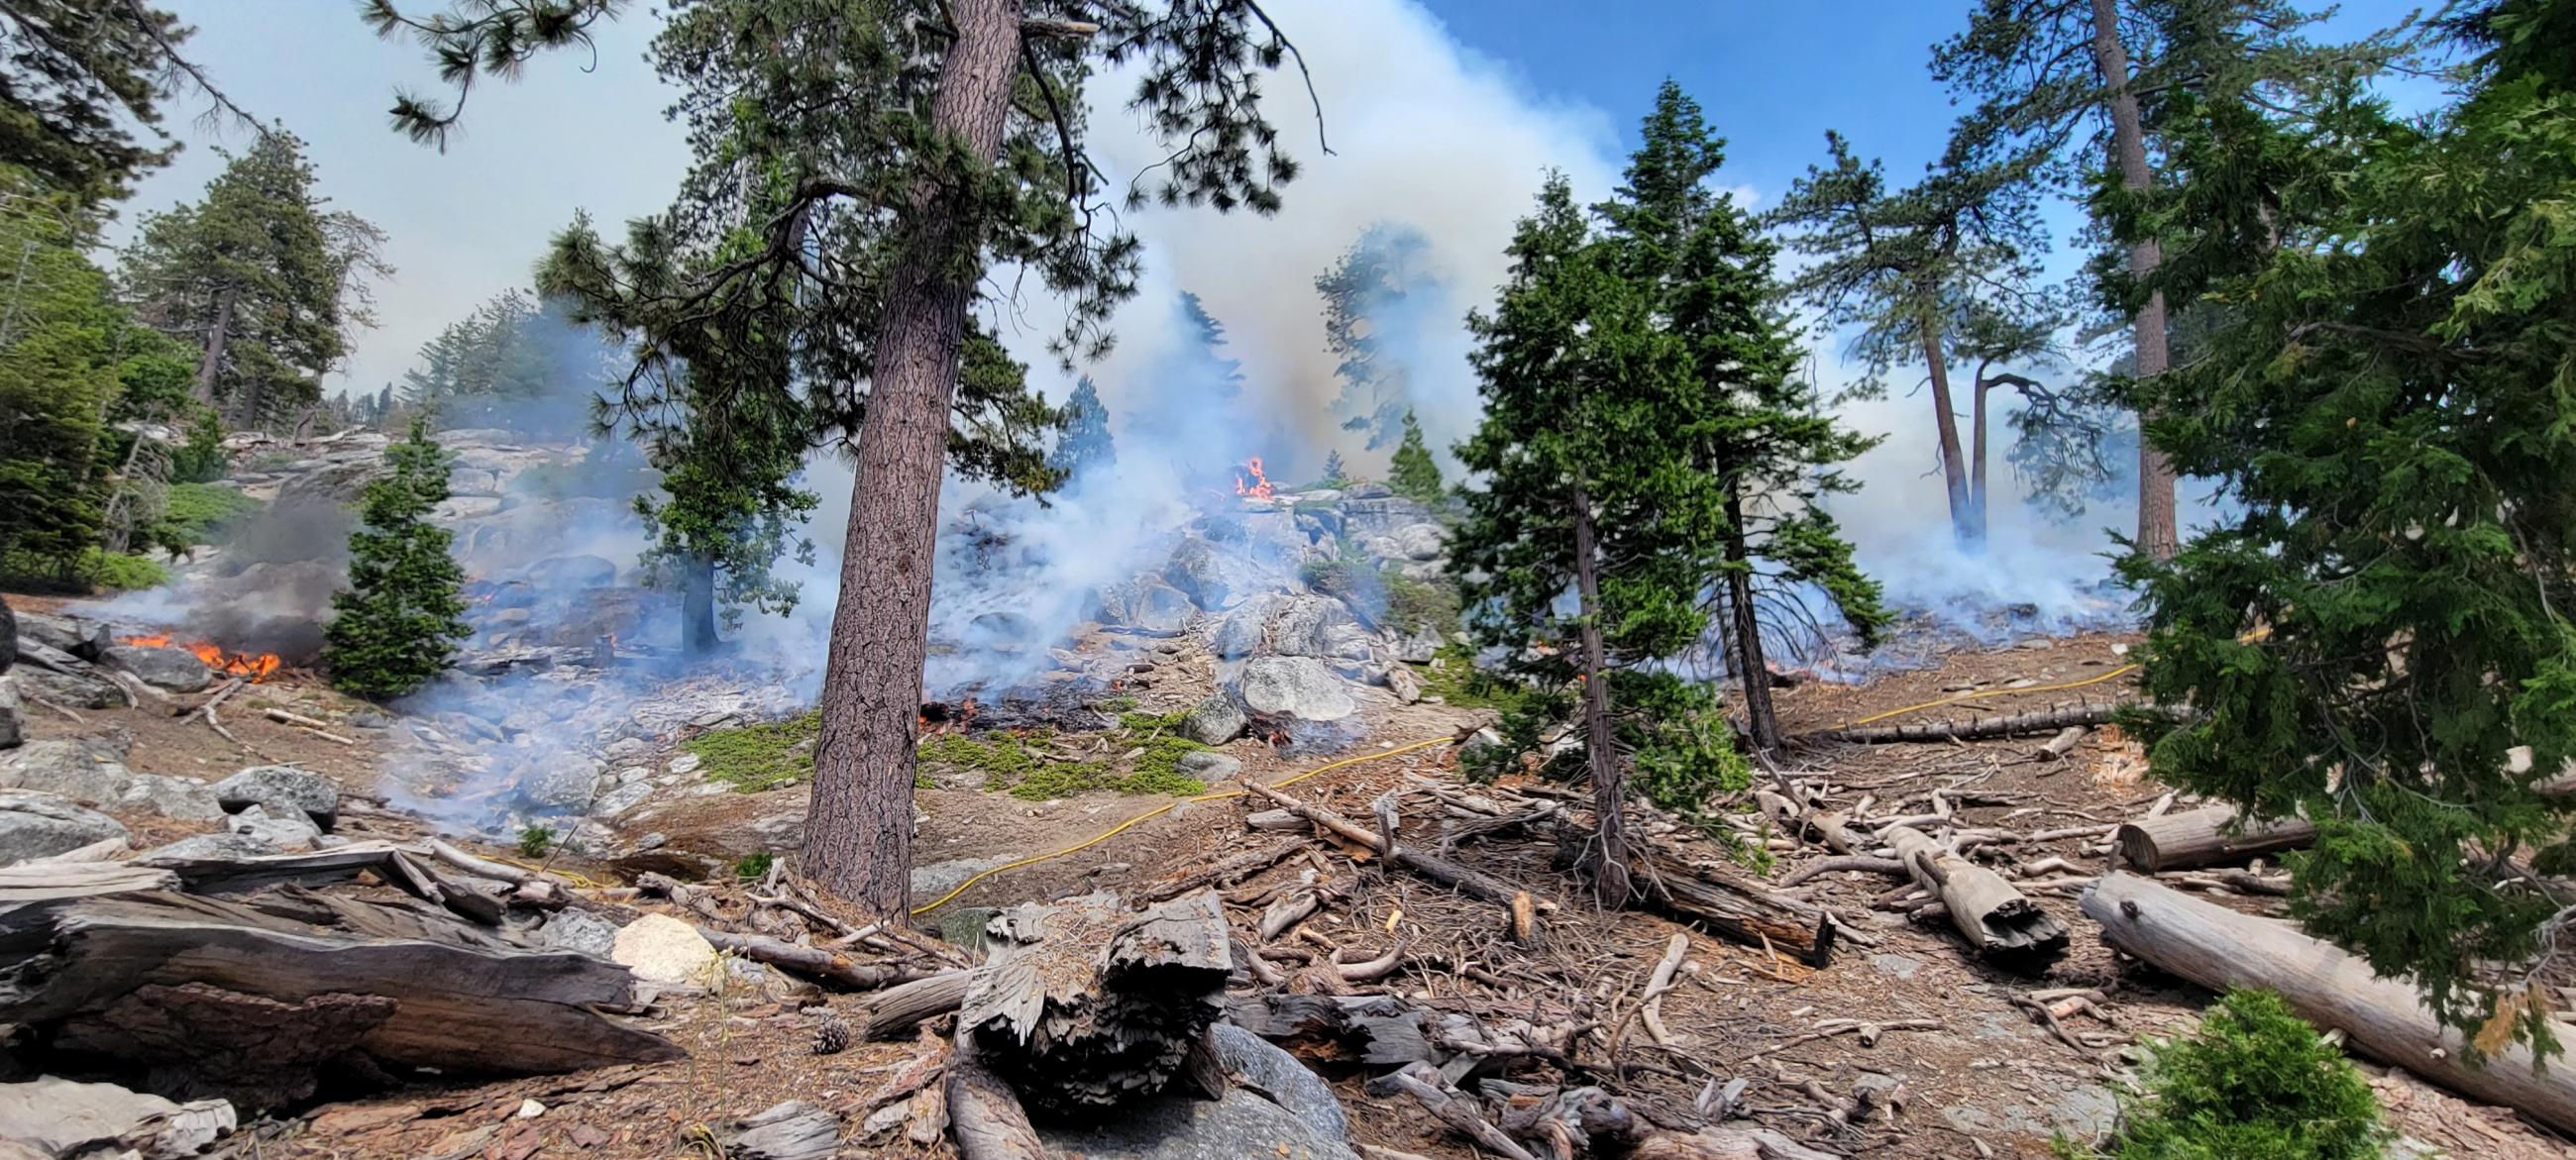 Photo of a forest with rocks, trees and dead and down fuels. The fuels are being consumed in the interior of the Park Ridge Prescribed fire.